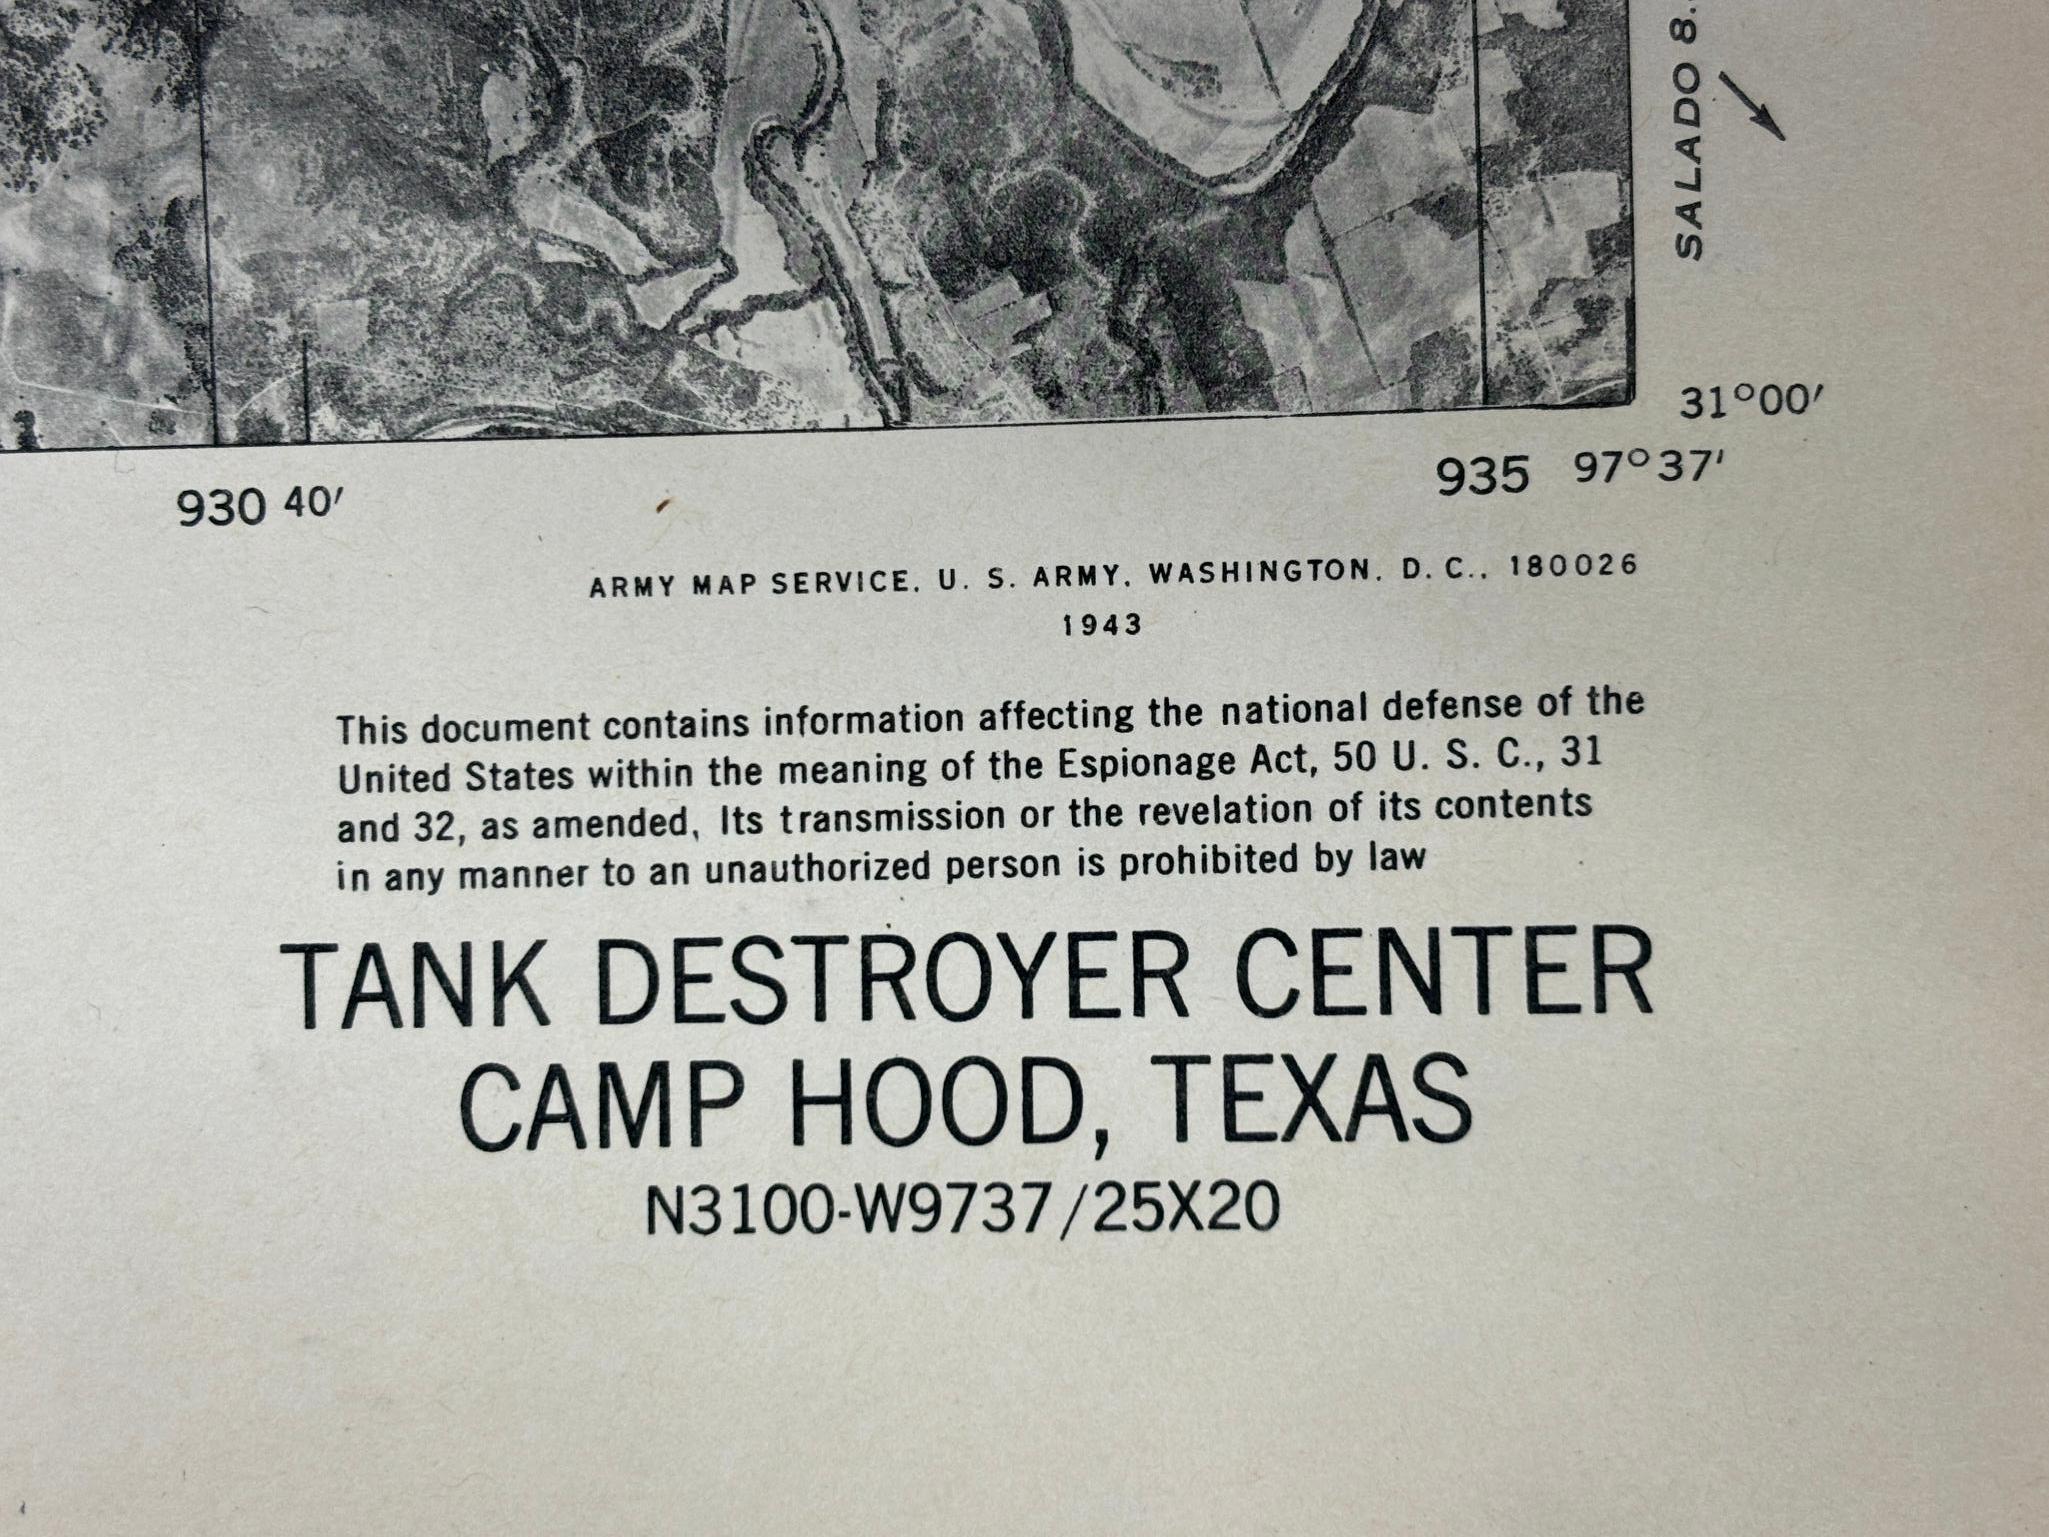 WWII 1943 US RESTRICTED CAMP HOOD ILLUSTRATED MAP